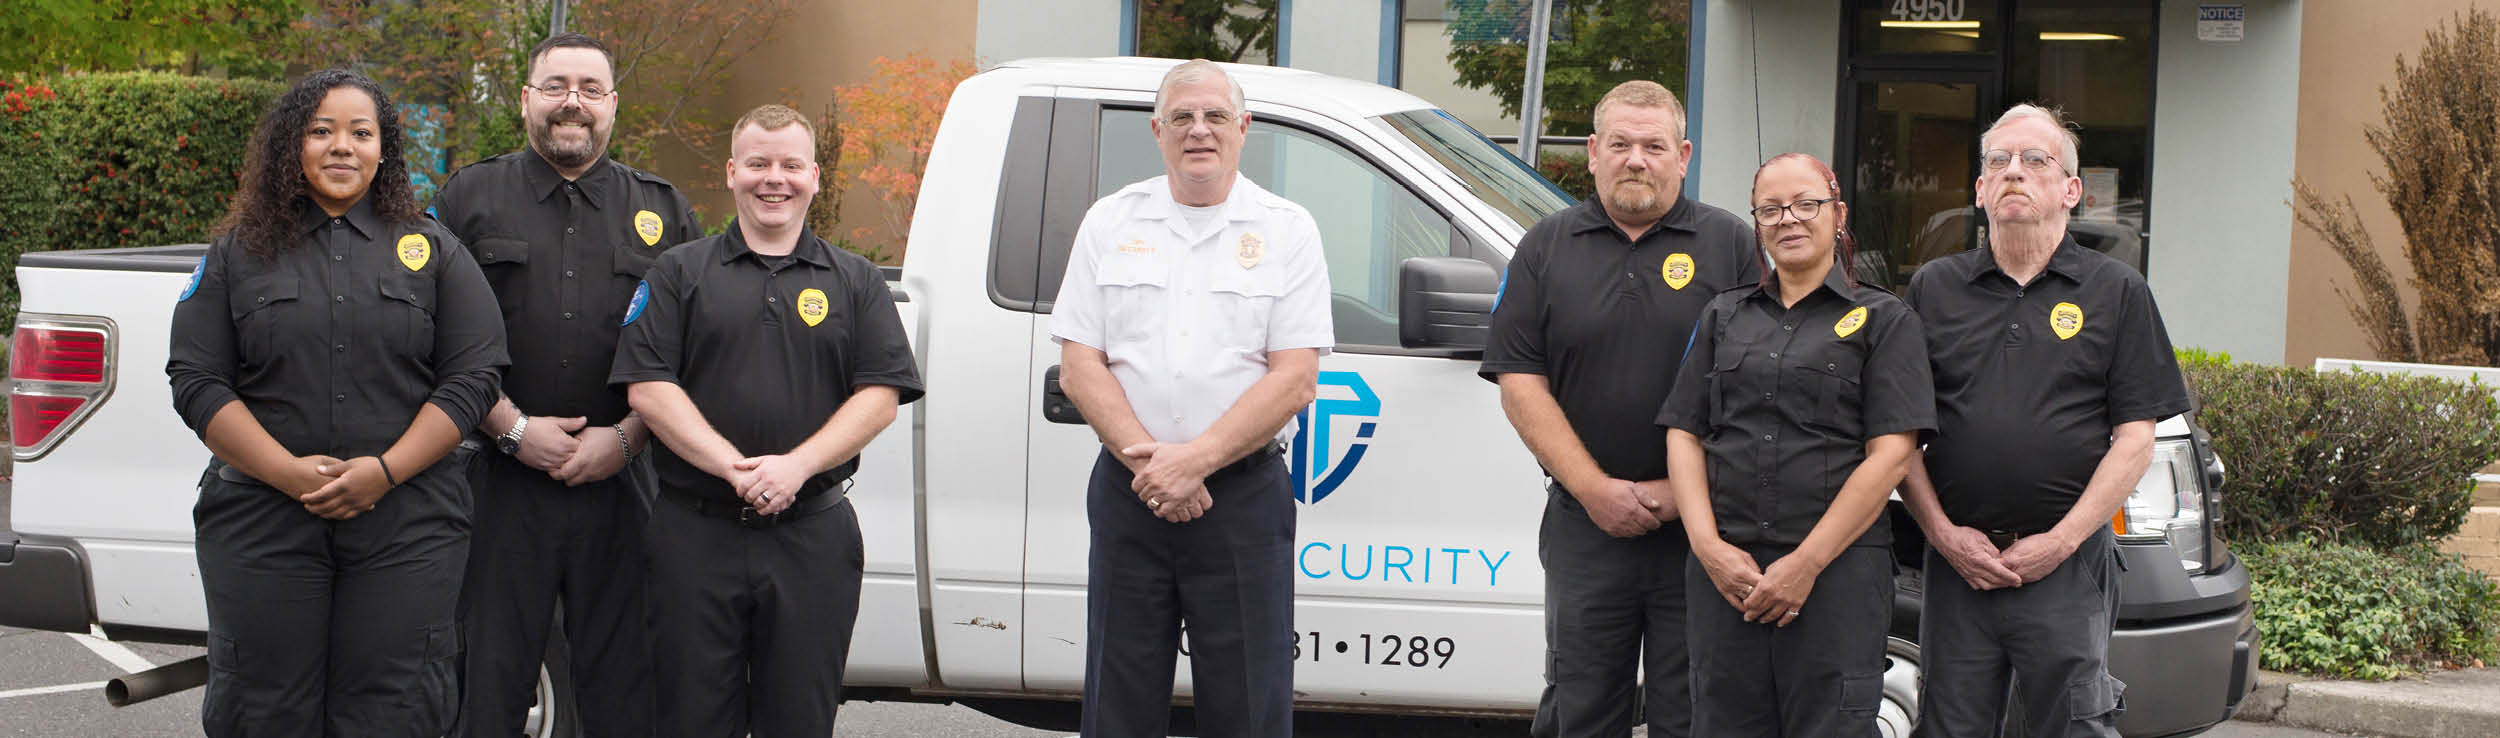 DPI Security Security Officers